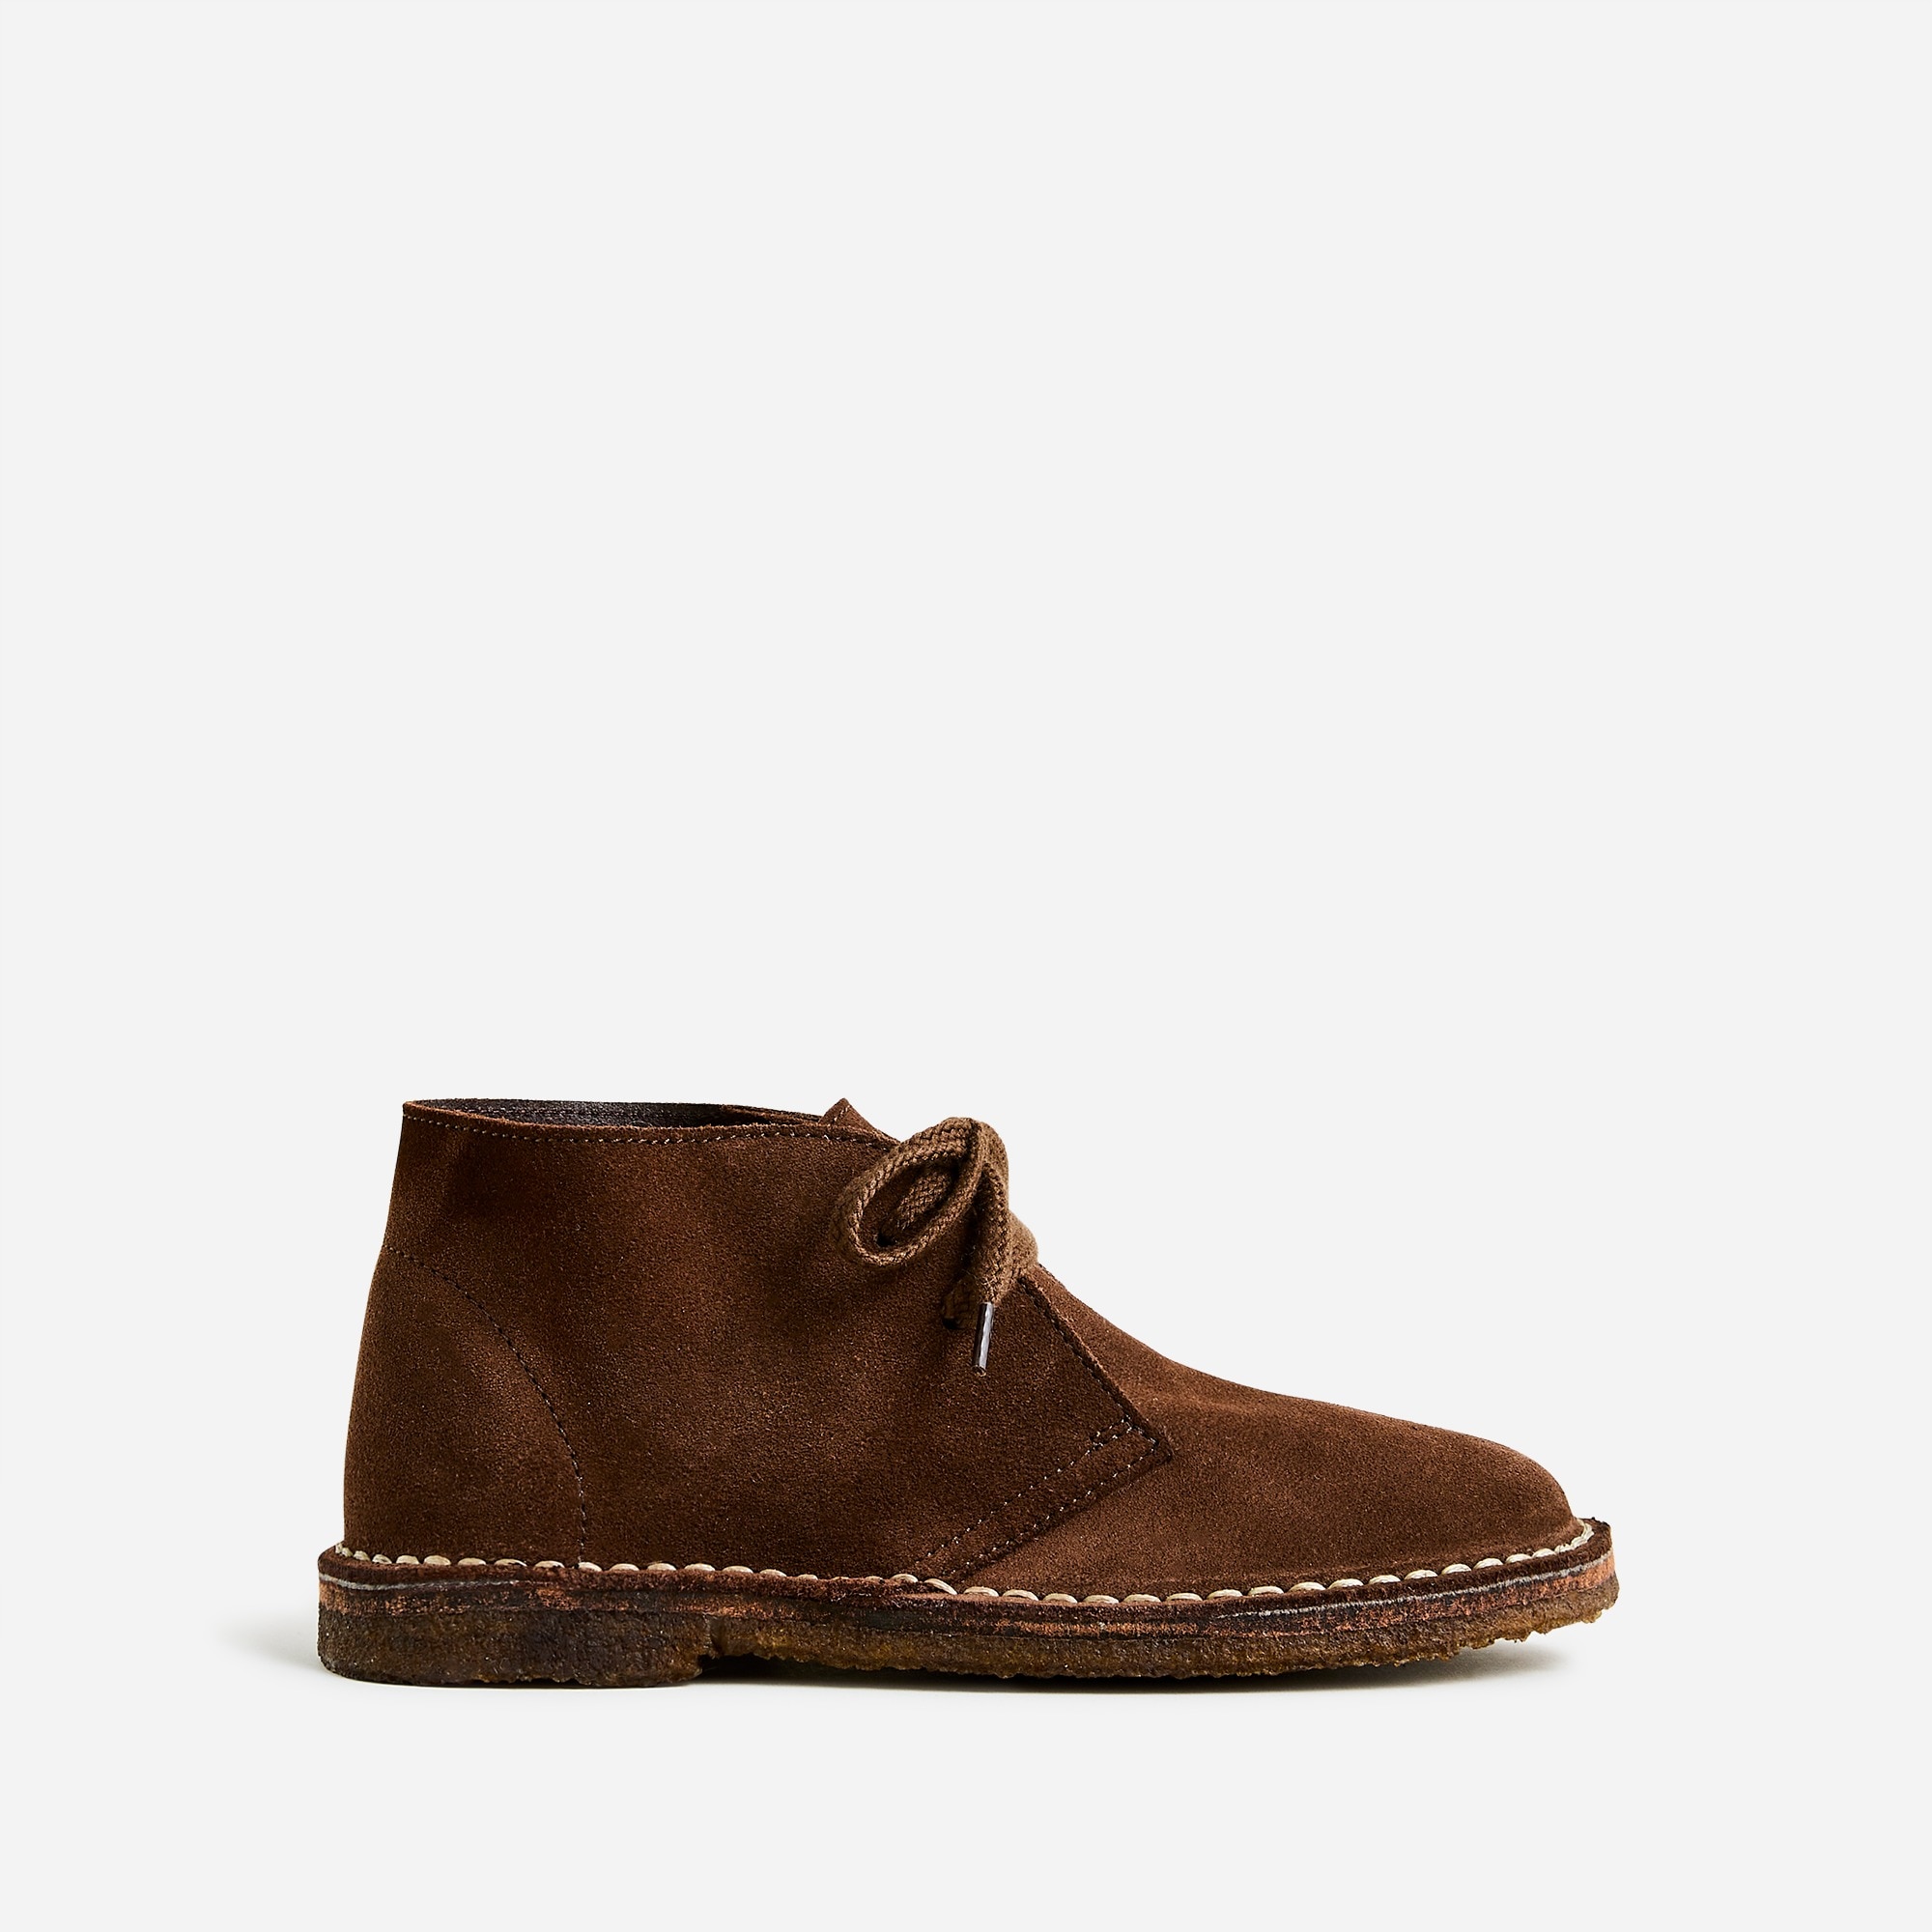  Kids' 1990 MacAlister boots in suede